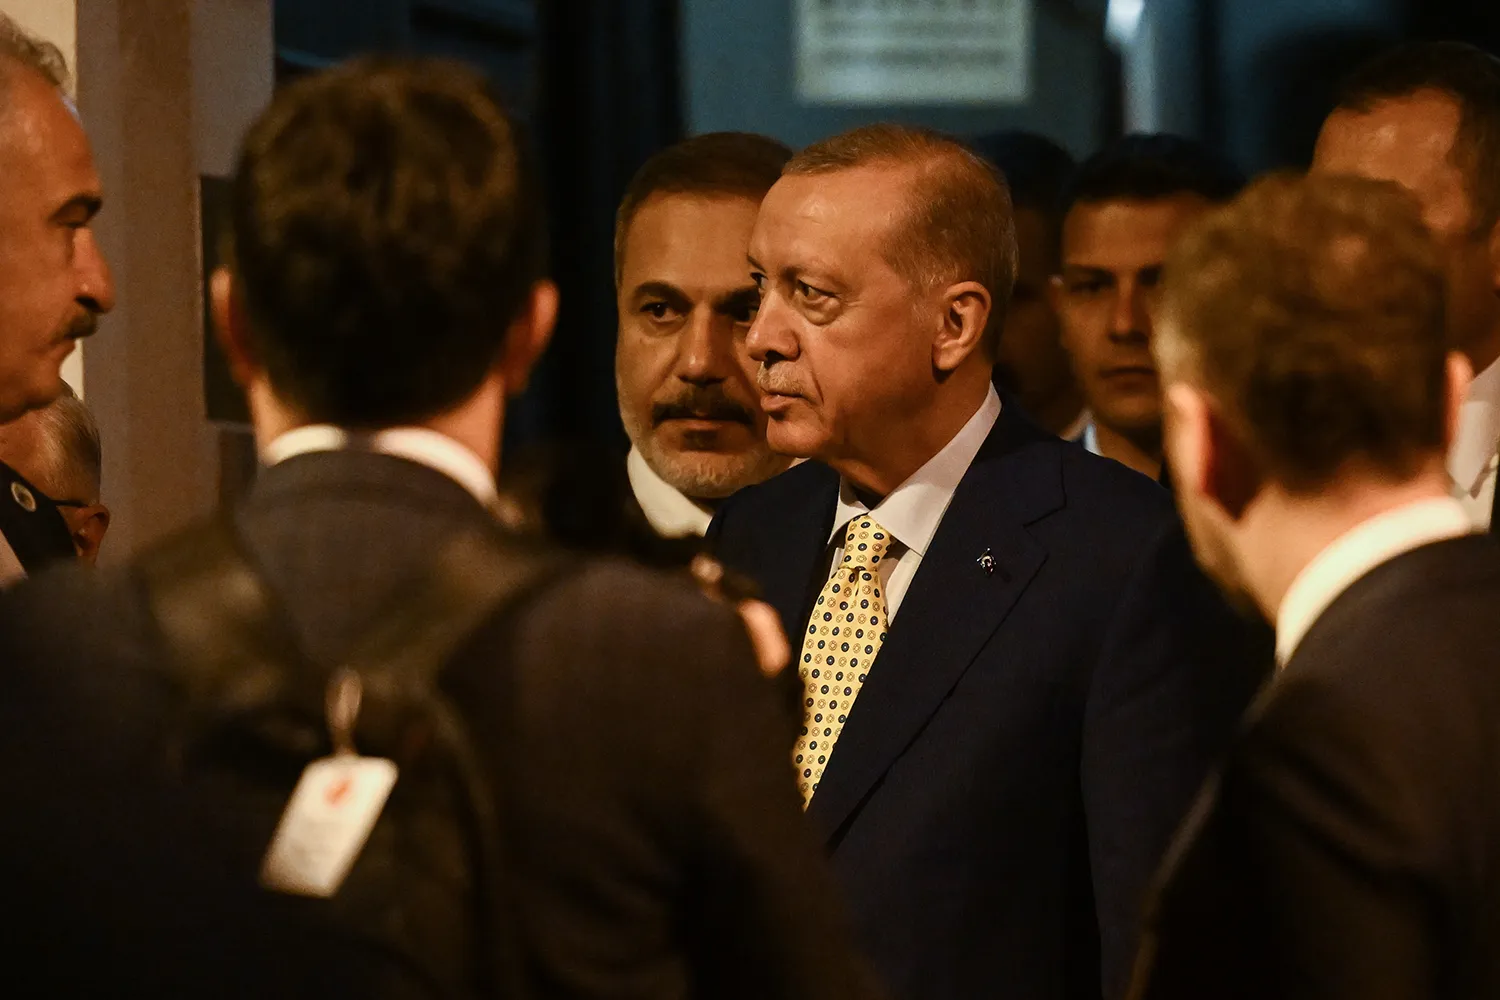 Turkish President Recep Tayyip Erdogan stands with members of his security detail in a crowded room at a NATO summit in Lithuania.